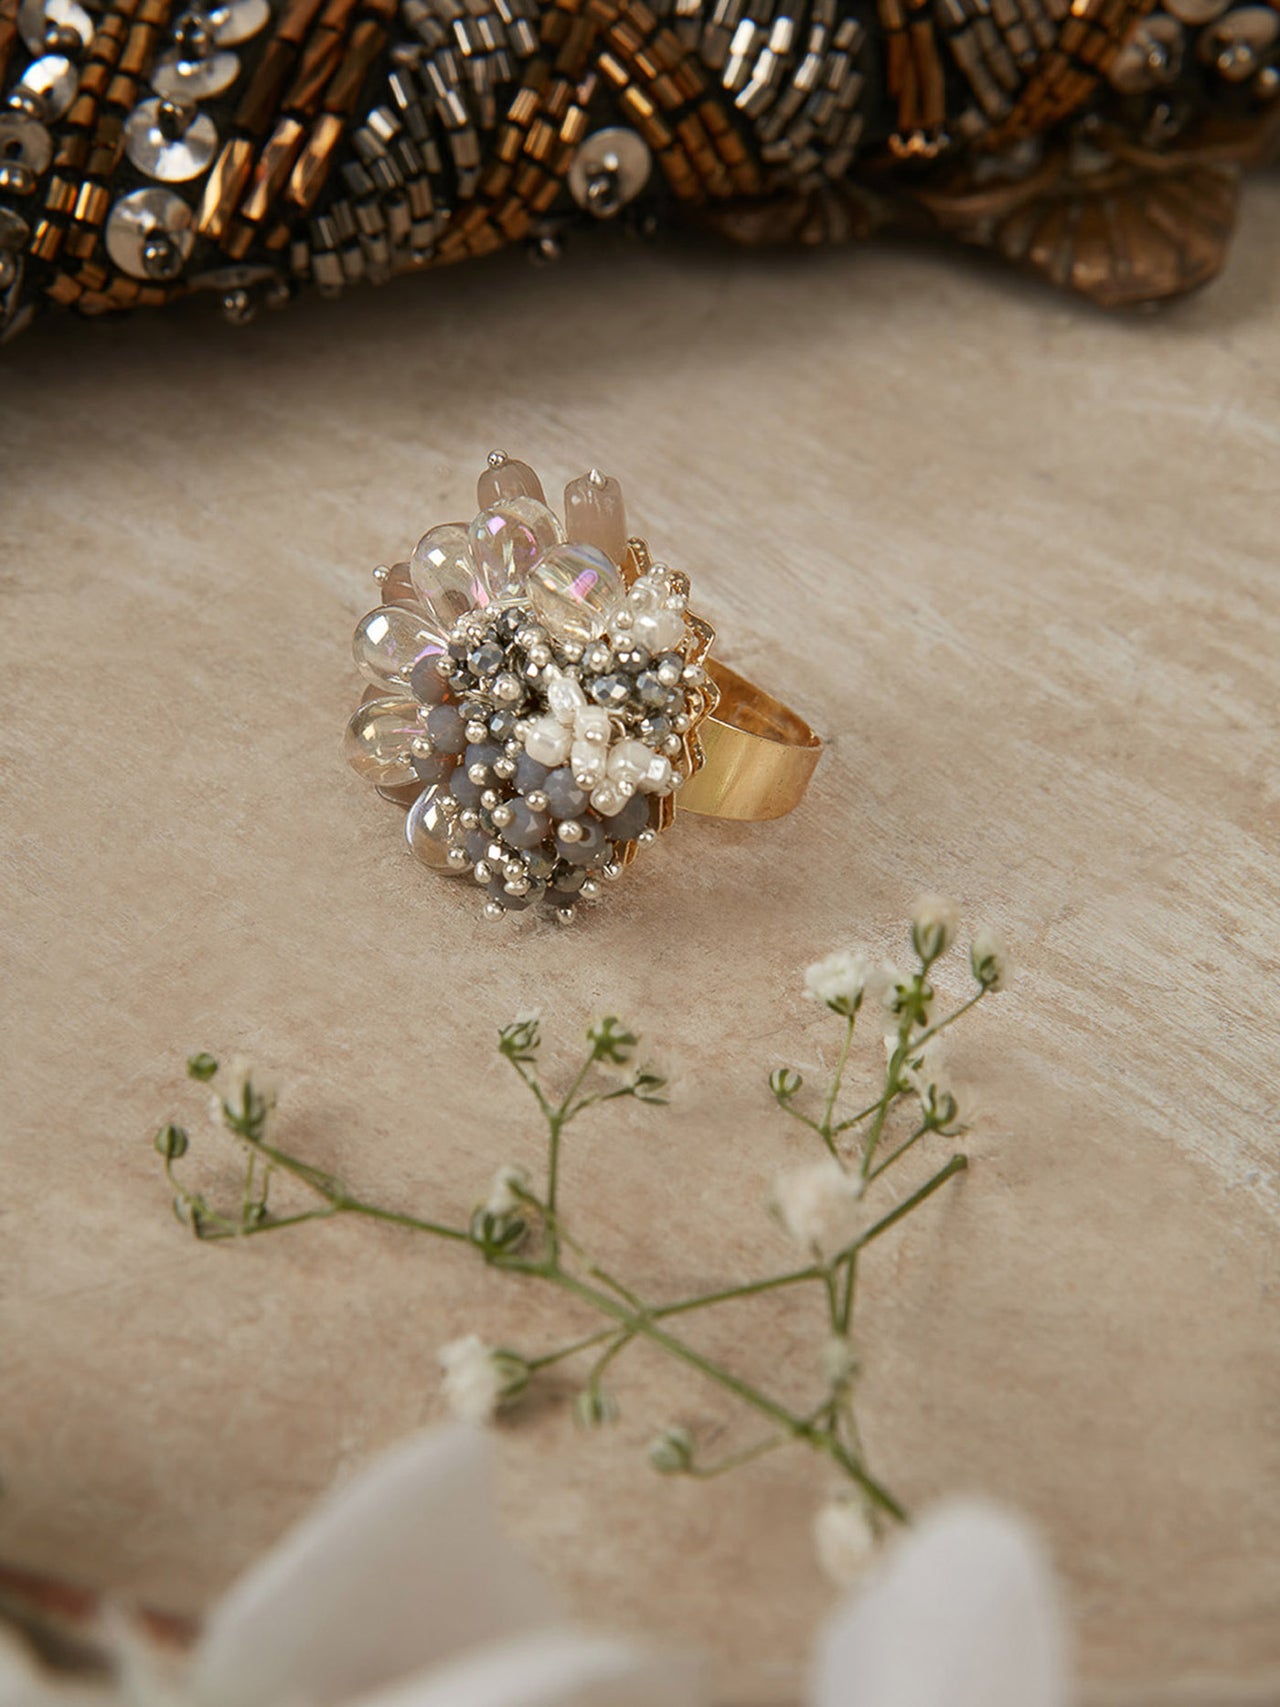 DORO - Silver Plated Metallic Ring With Stones And Pearls - Meraki Lifestyle Store